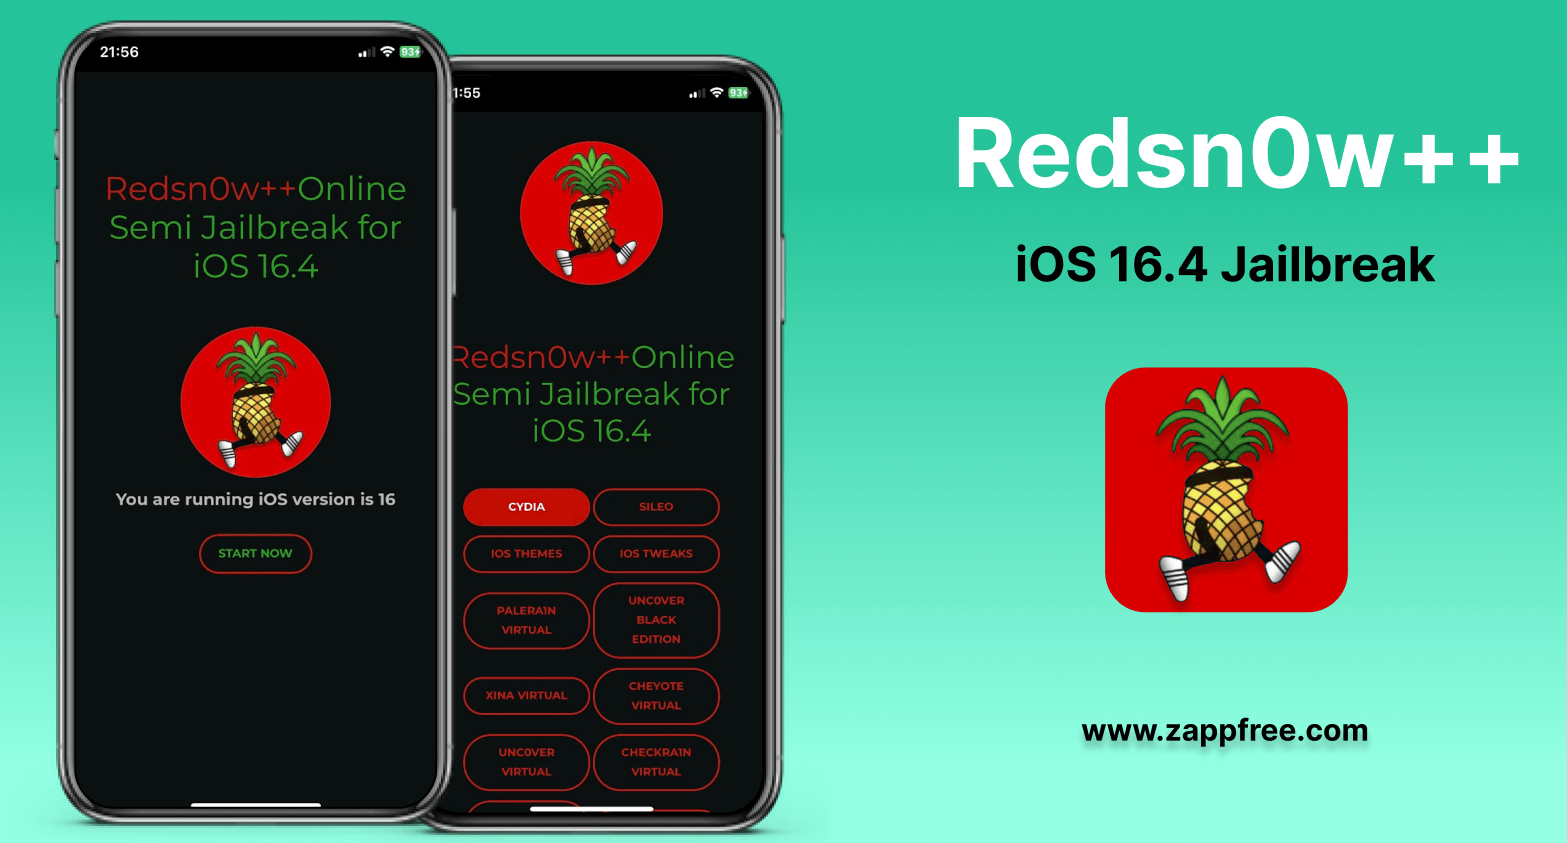 iOS 16.4 and 16.4.1 jailbreak with Redsn0w++